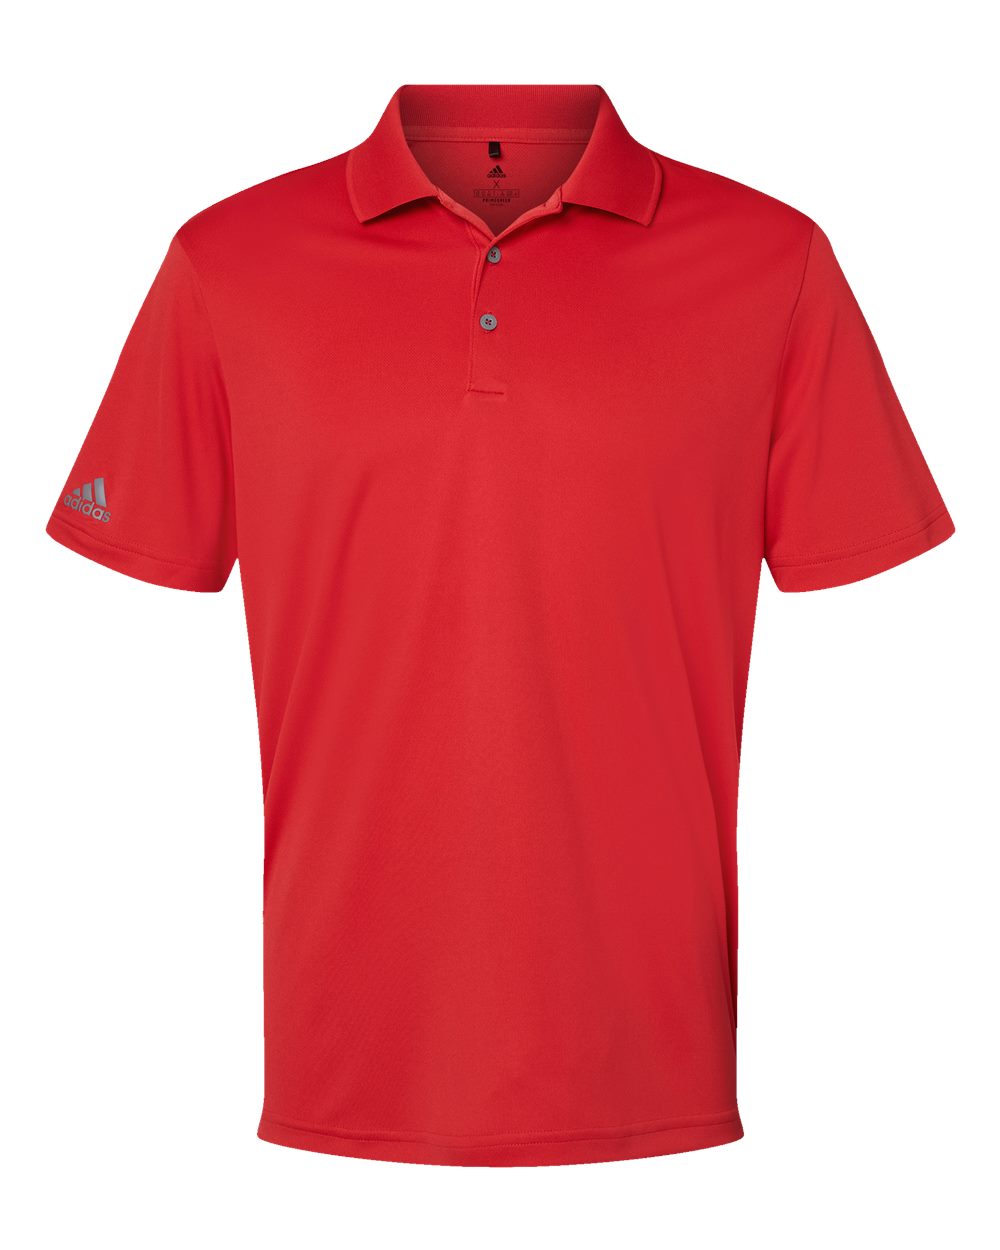 Adidas A230 Performance Polo #color_Collegiate Red